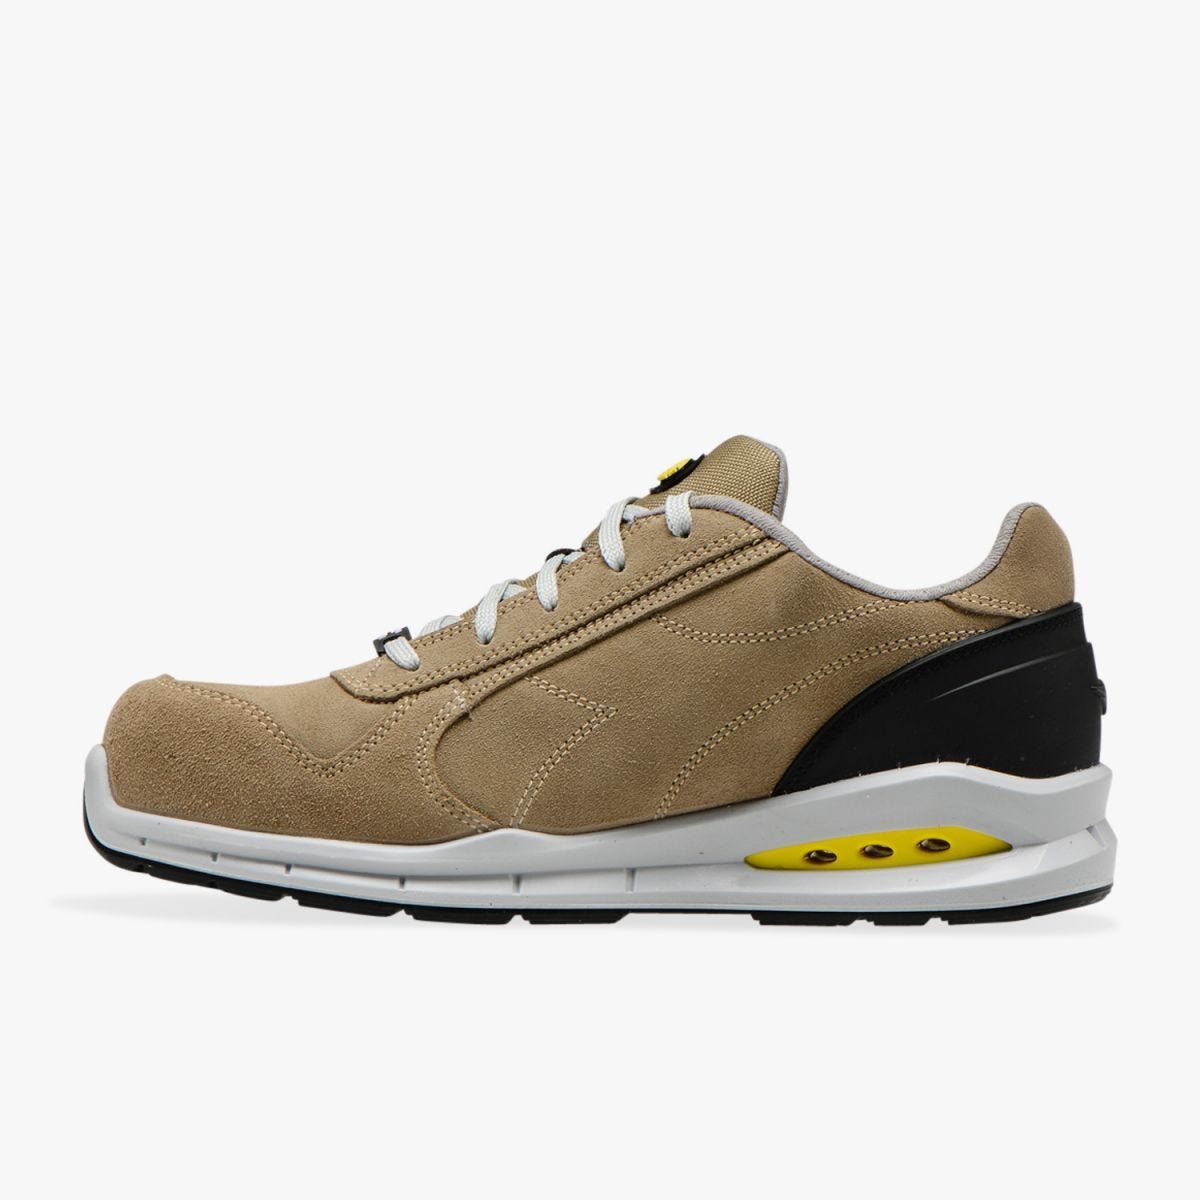 CHAUSSURE SECURITE RUN NET AIRBOX LOW S3 SRC TAUPE/TAUPE - Diadora - Taille 46 1